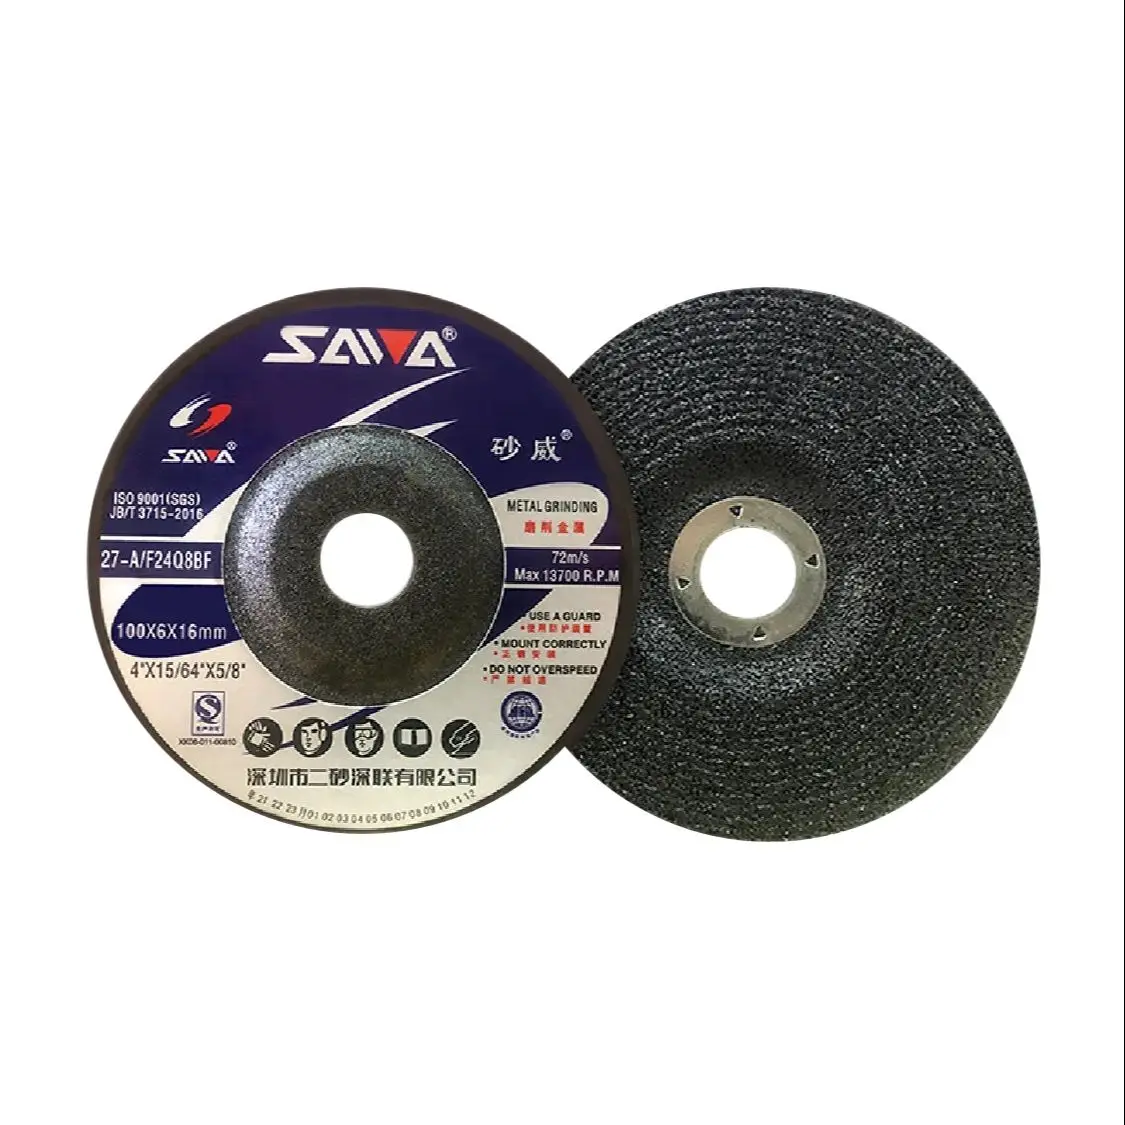 angle clamp 104 mm cast iron Grinding Disc 100, 125, 150, Cymbal Type Grinding Disc, Thickened Wear-Resistant Grinding Disc, Cast Iron Angle Grinding Disc